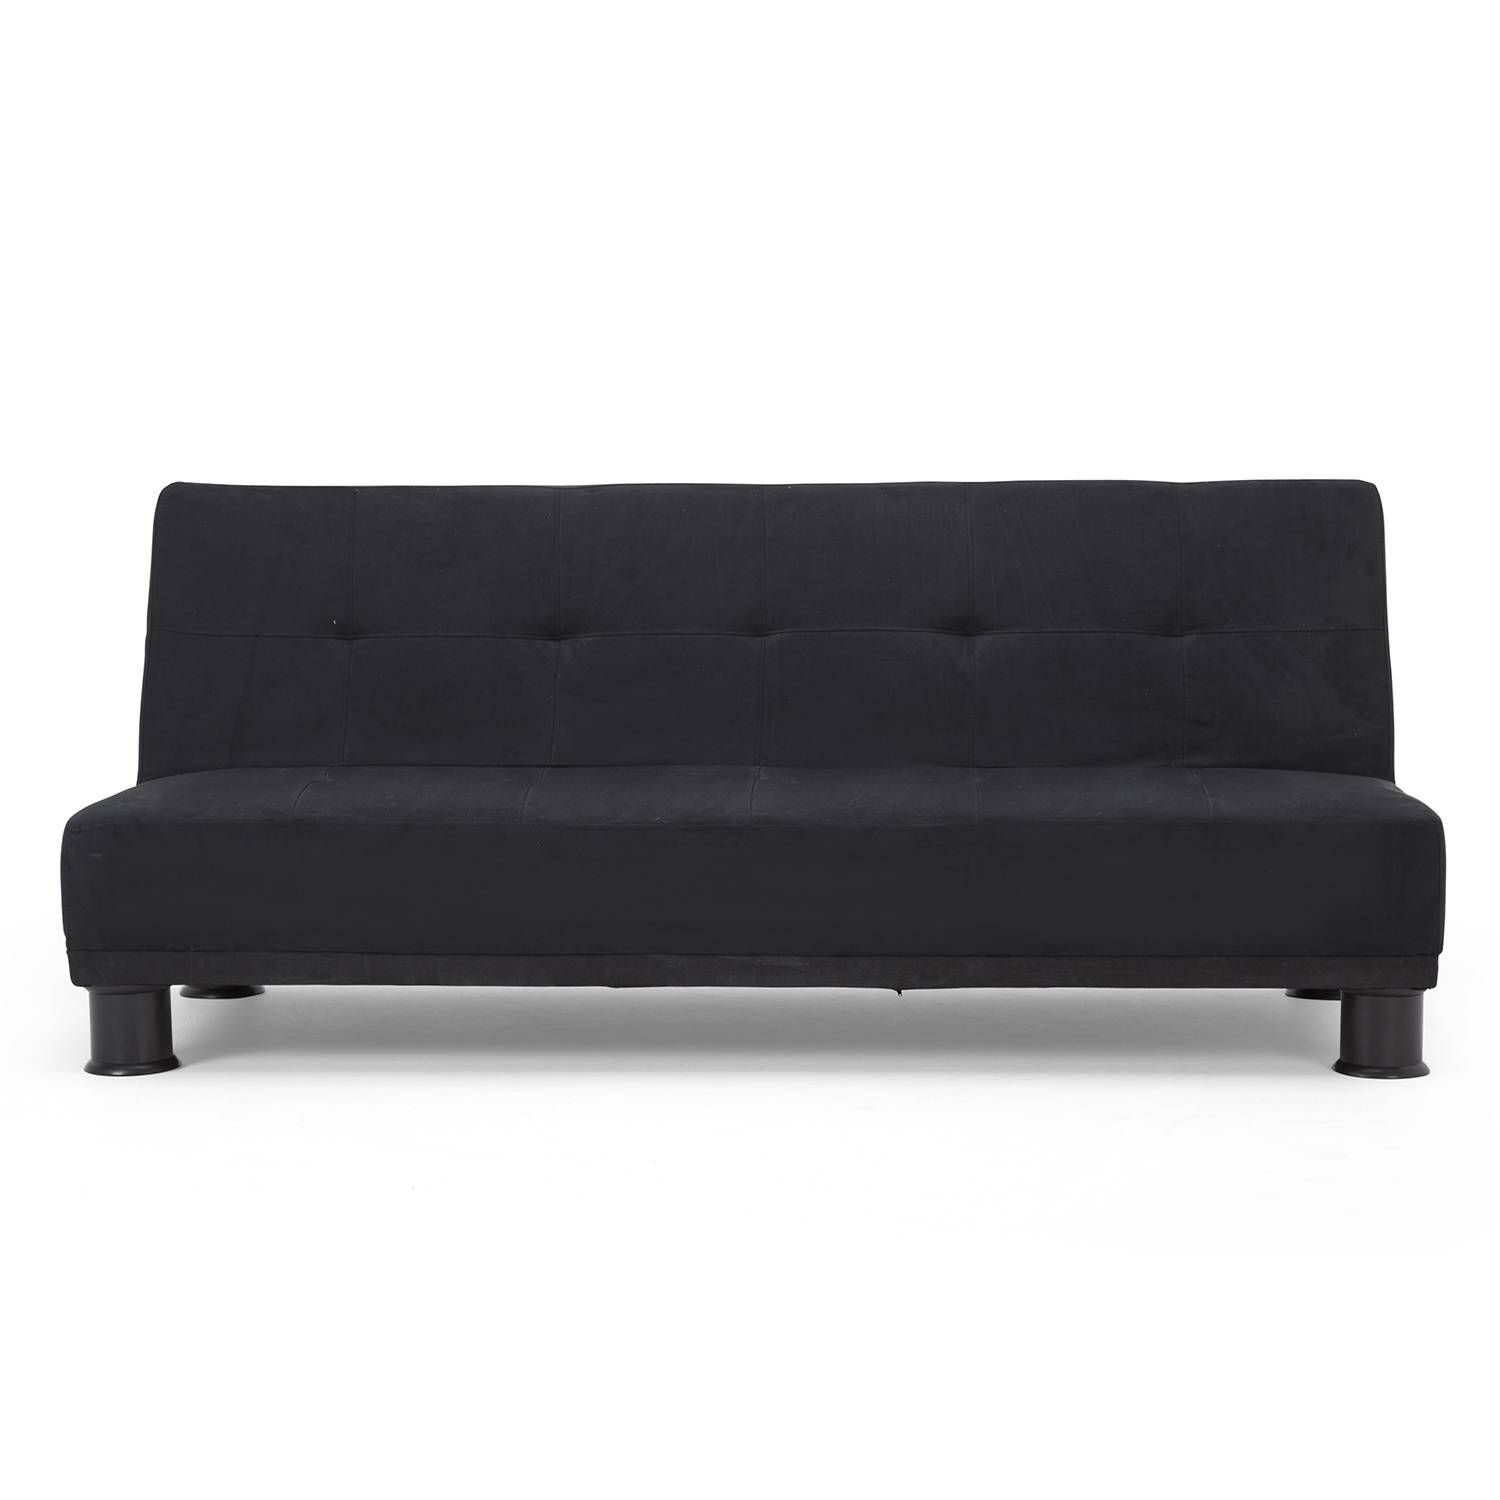 Ismi Faux Suede Sofa Bed – Next Day Delivery Ismi Faux Suede Sofa Bed Intended For Faux Suede Sofas (View 10 of 10)